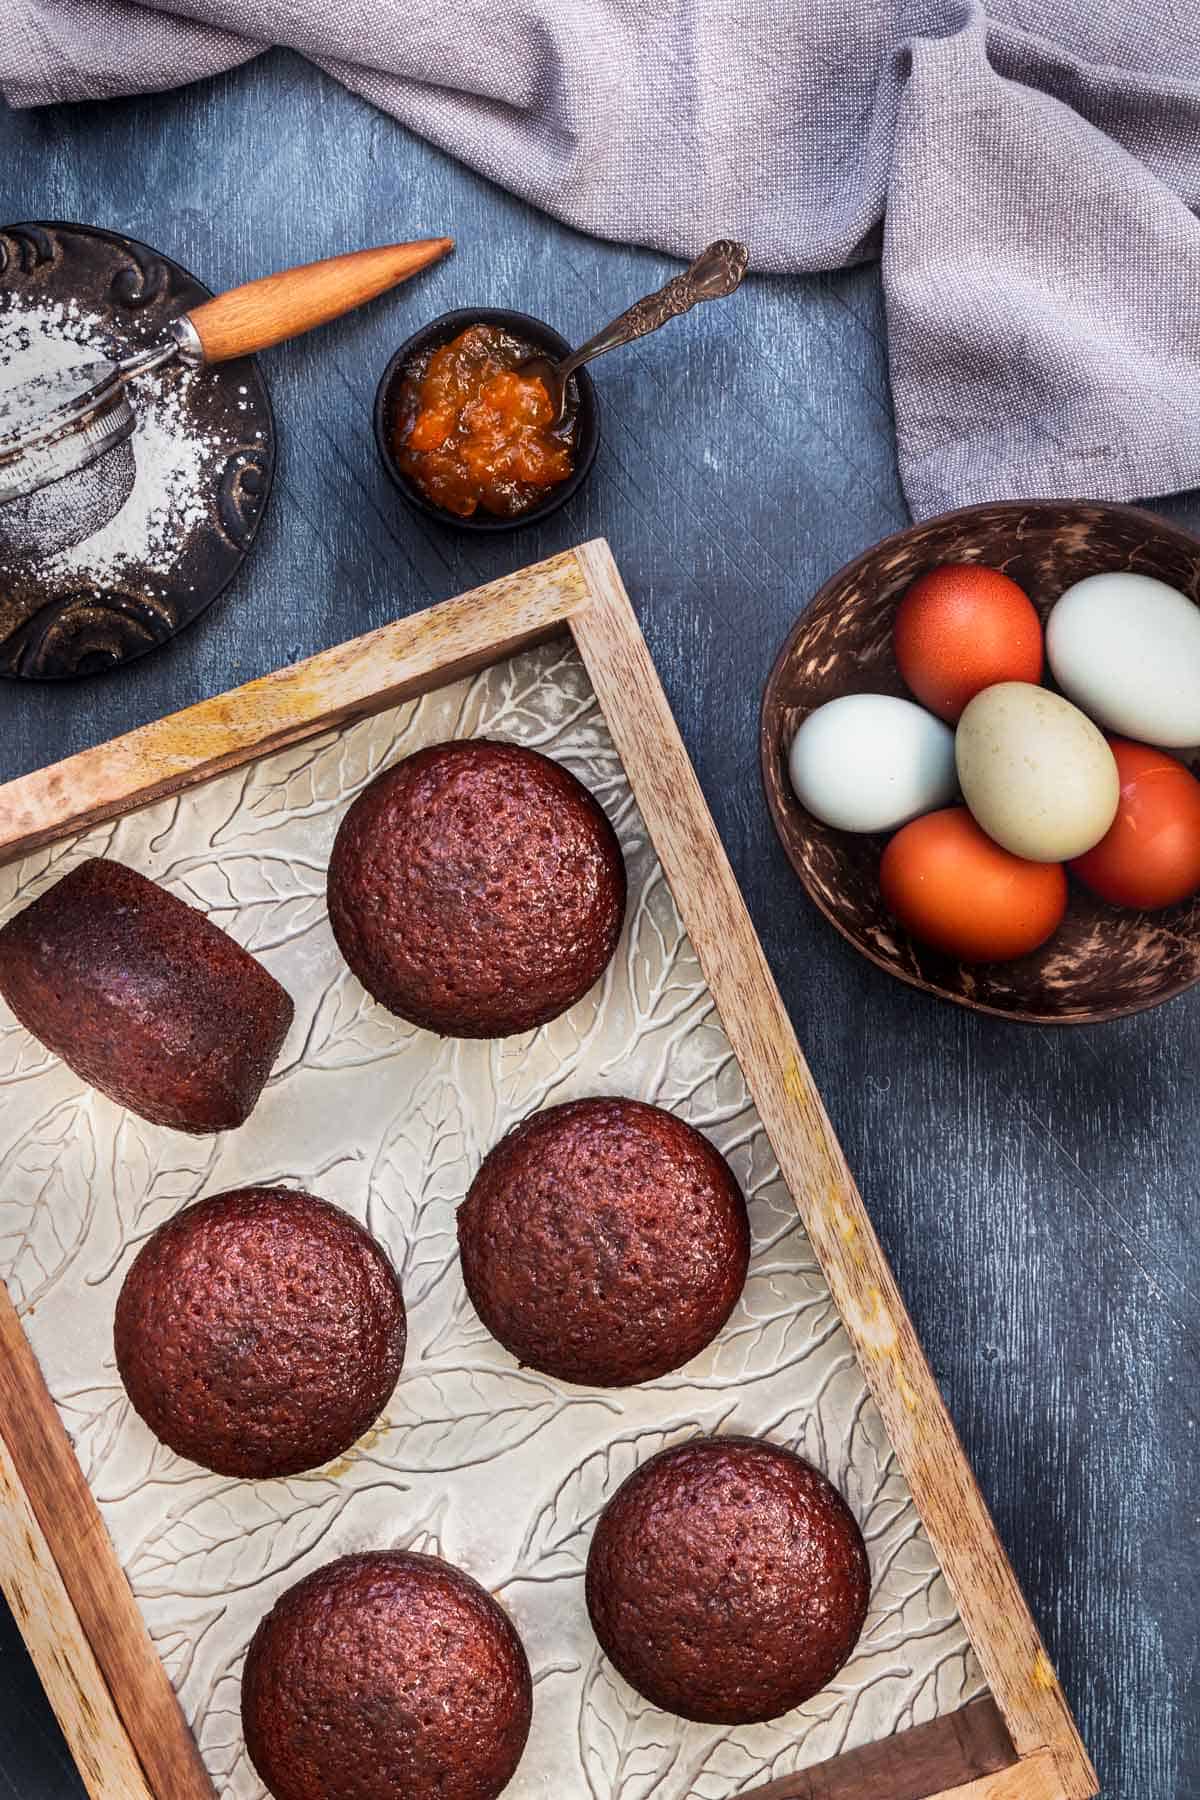 South African malva pudding cakes in a wooden tray on the table with eggs, jam, and powder sugar.